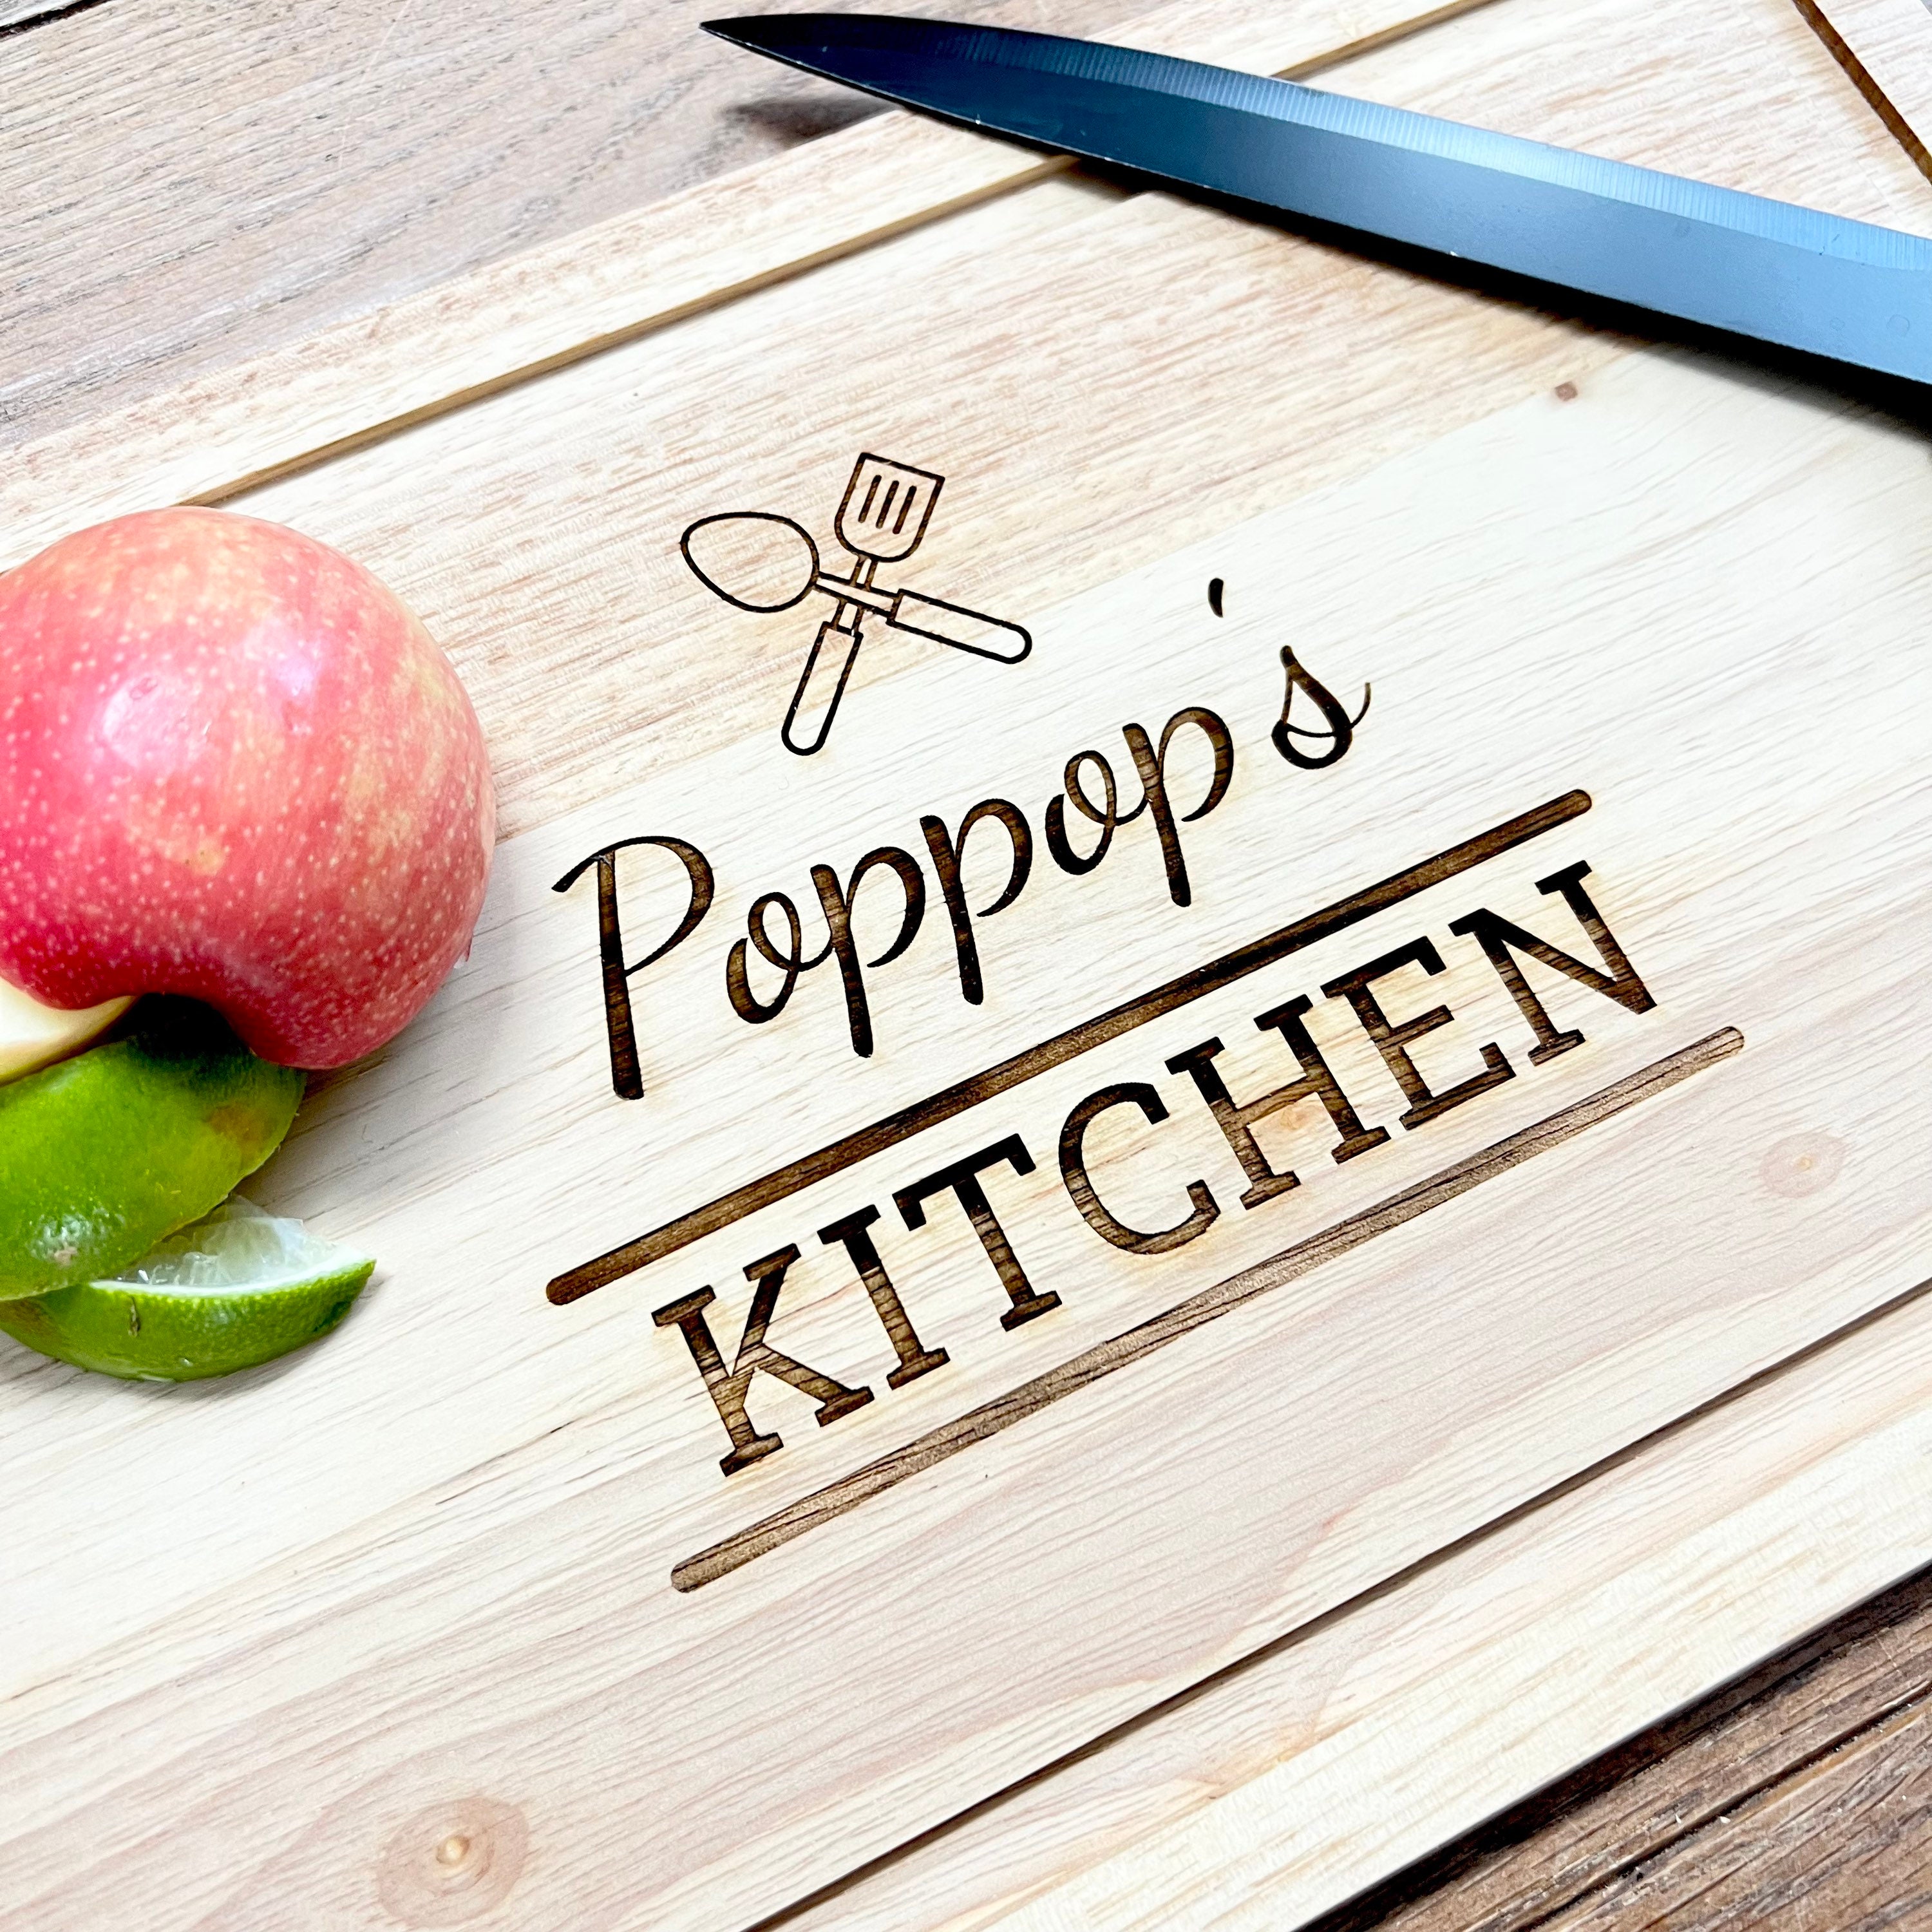 Wood Engraved Custom Cutting Board - PopPop's Kitchen - Grandfather gift- Personalized  Cutting Board